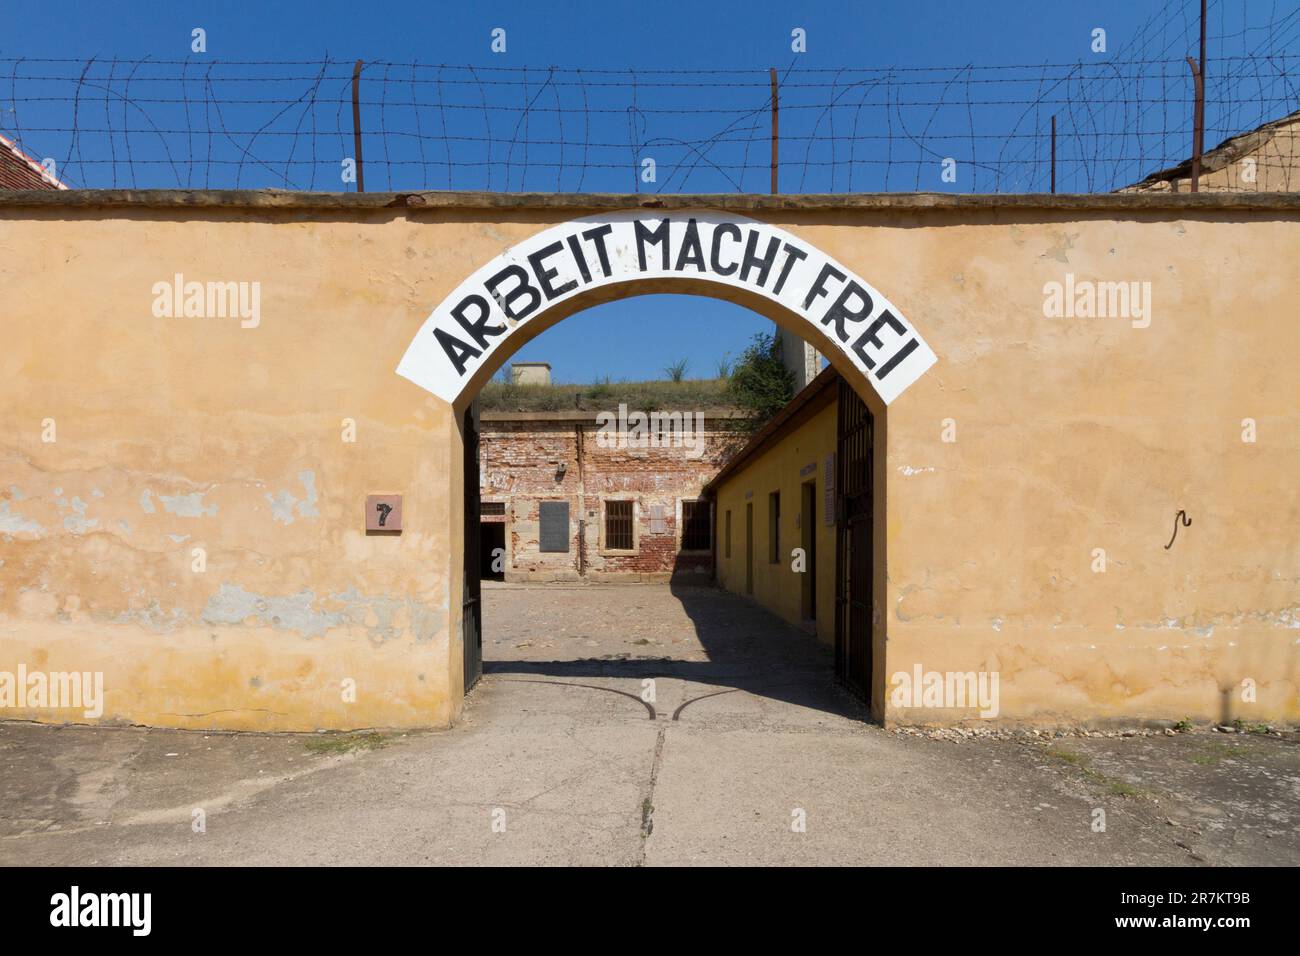 Gate with the slogan "Arbeit macht frei" in the Small Fortress of Terezín (Theresienstadt concentration camp) Stock Photo